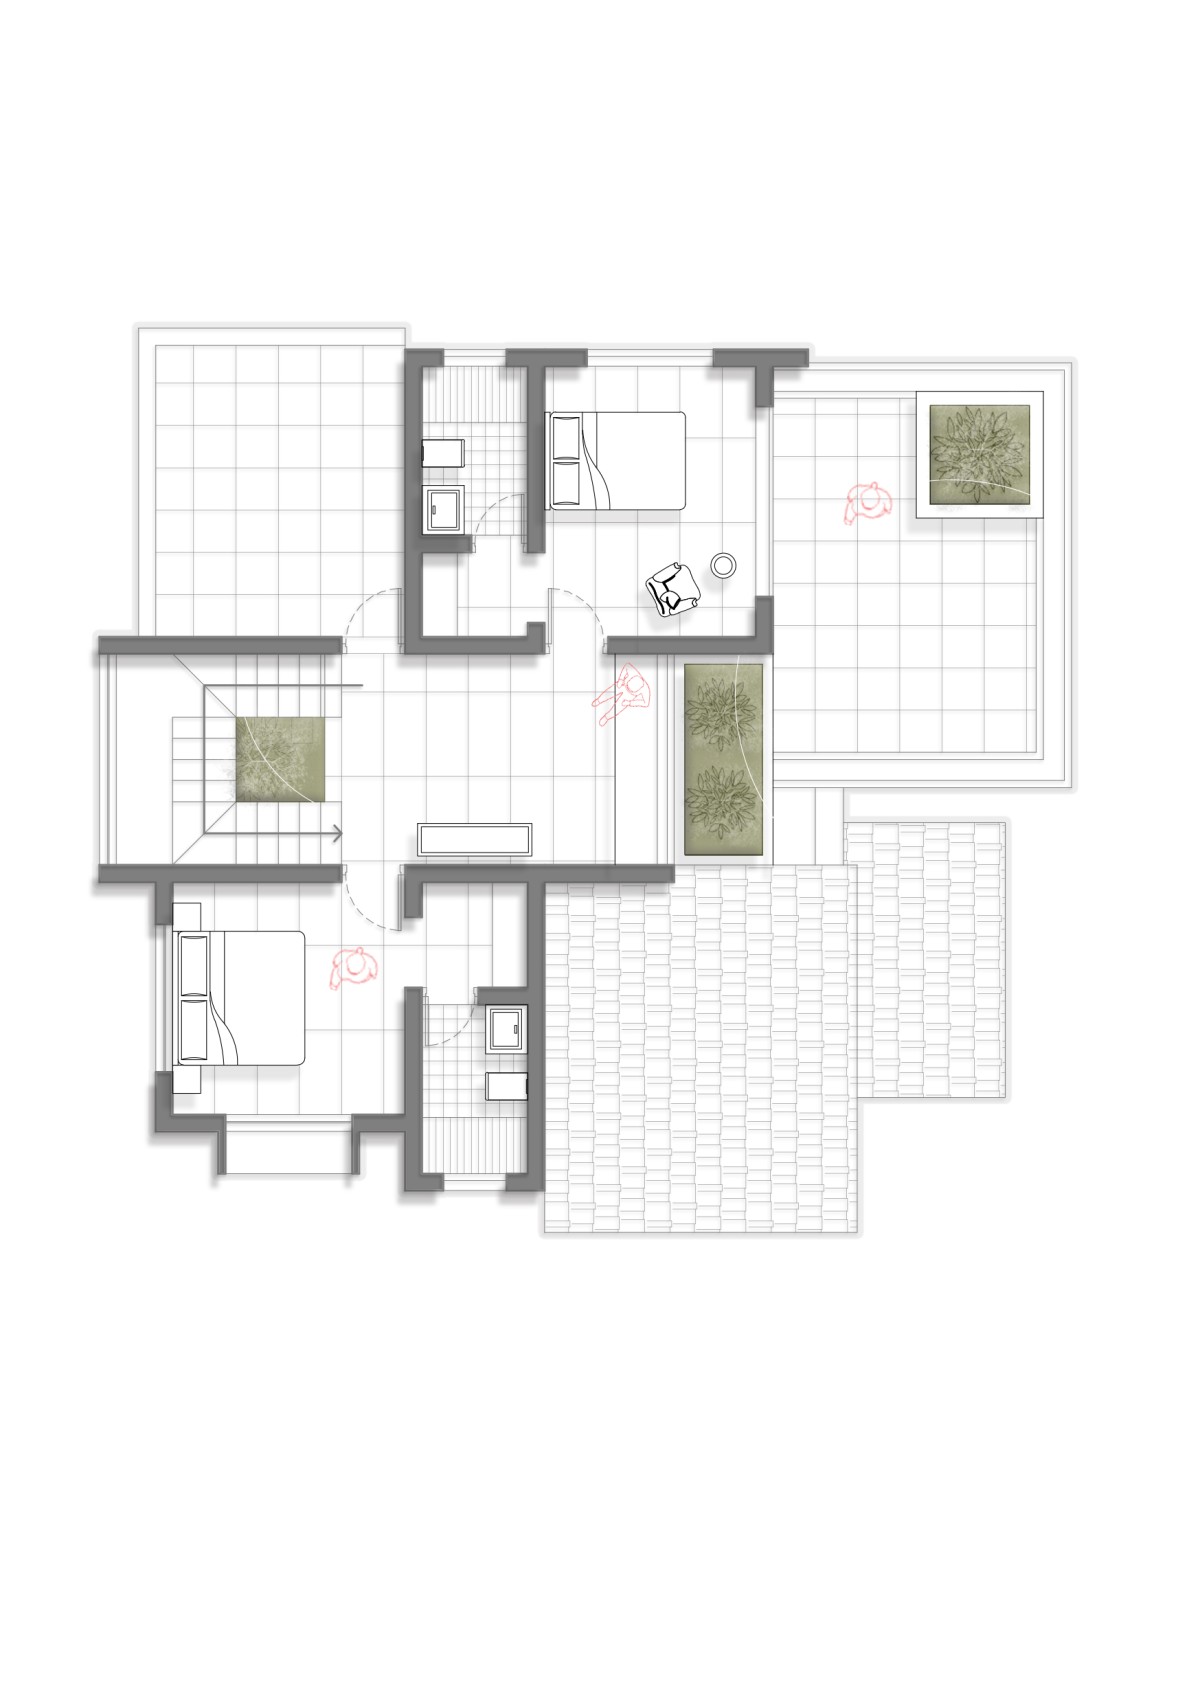 First floor plan of Inward House by Archstation Architecture